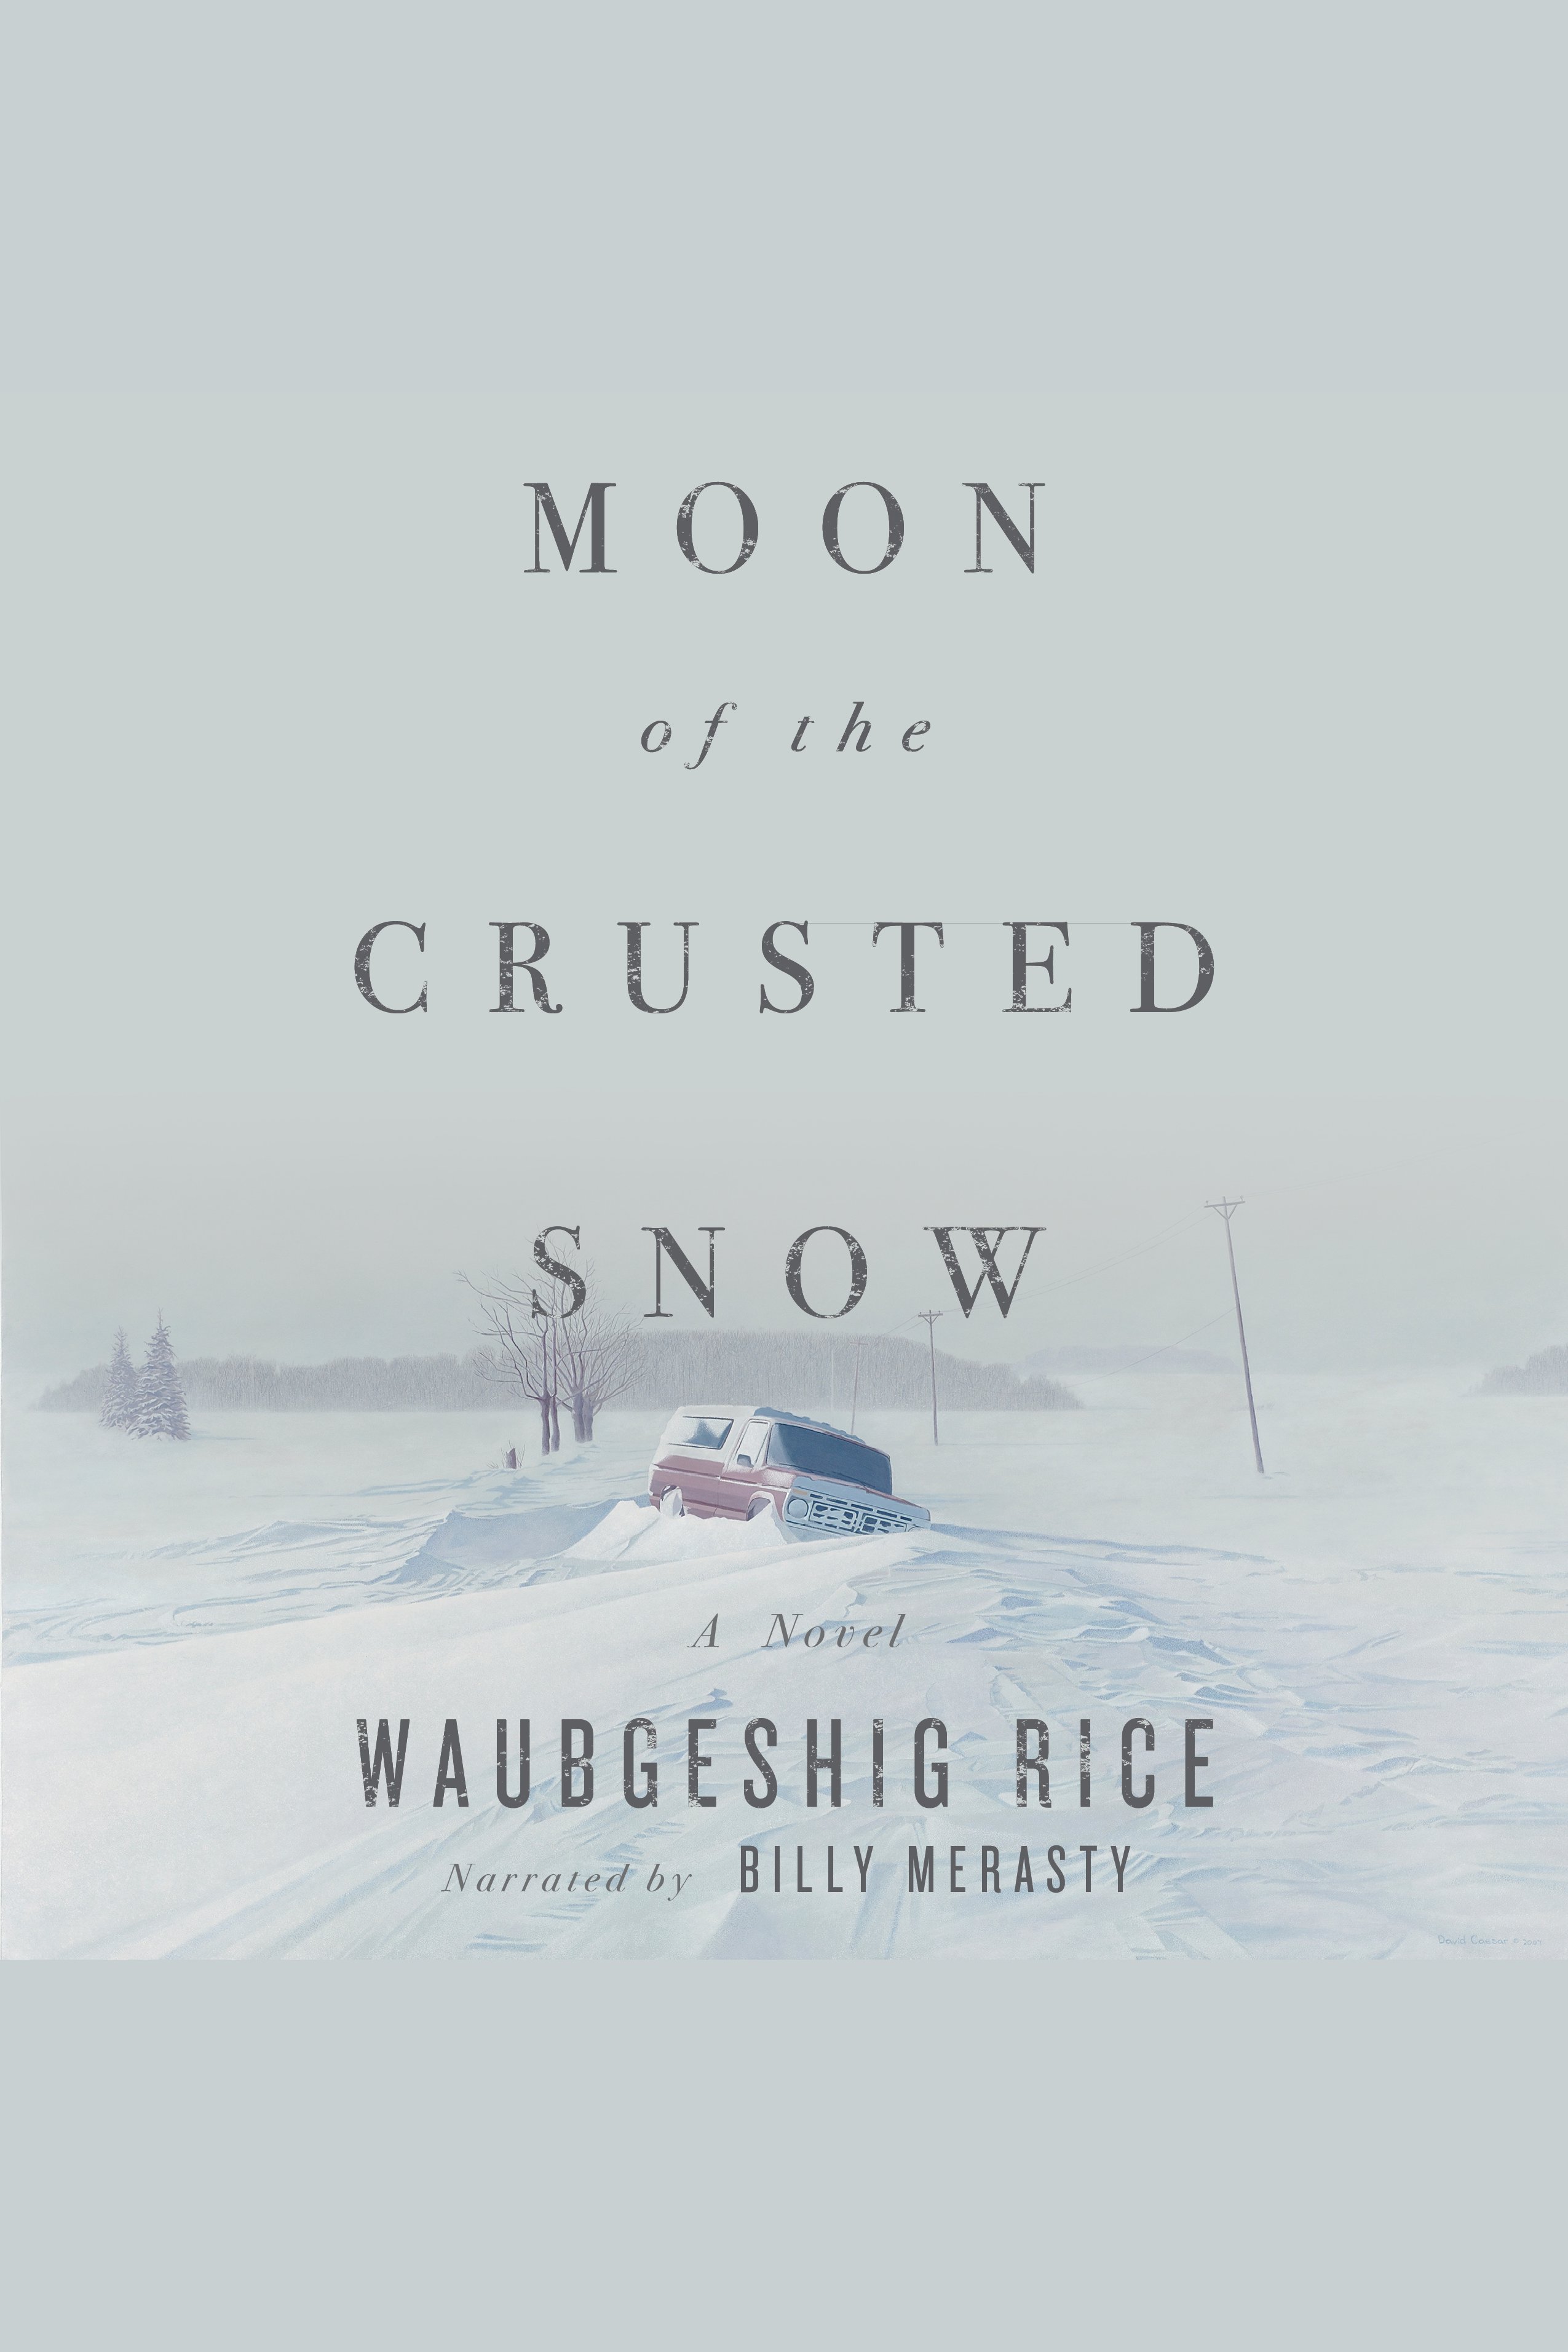 Moon of the Crusted Snow